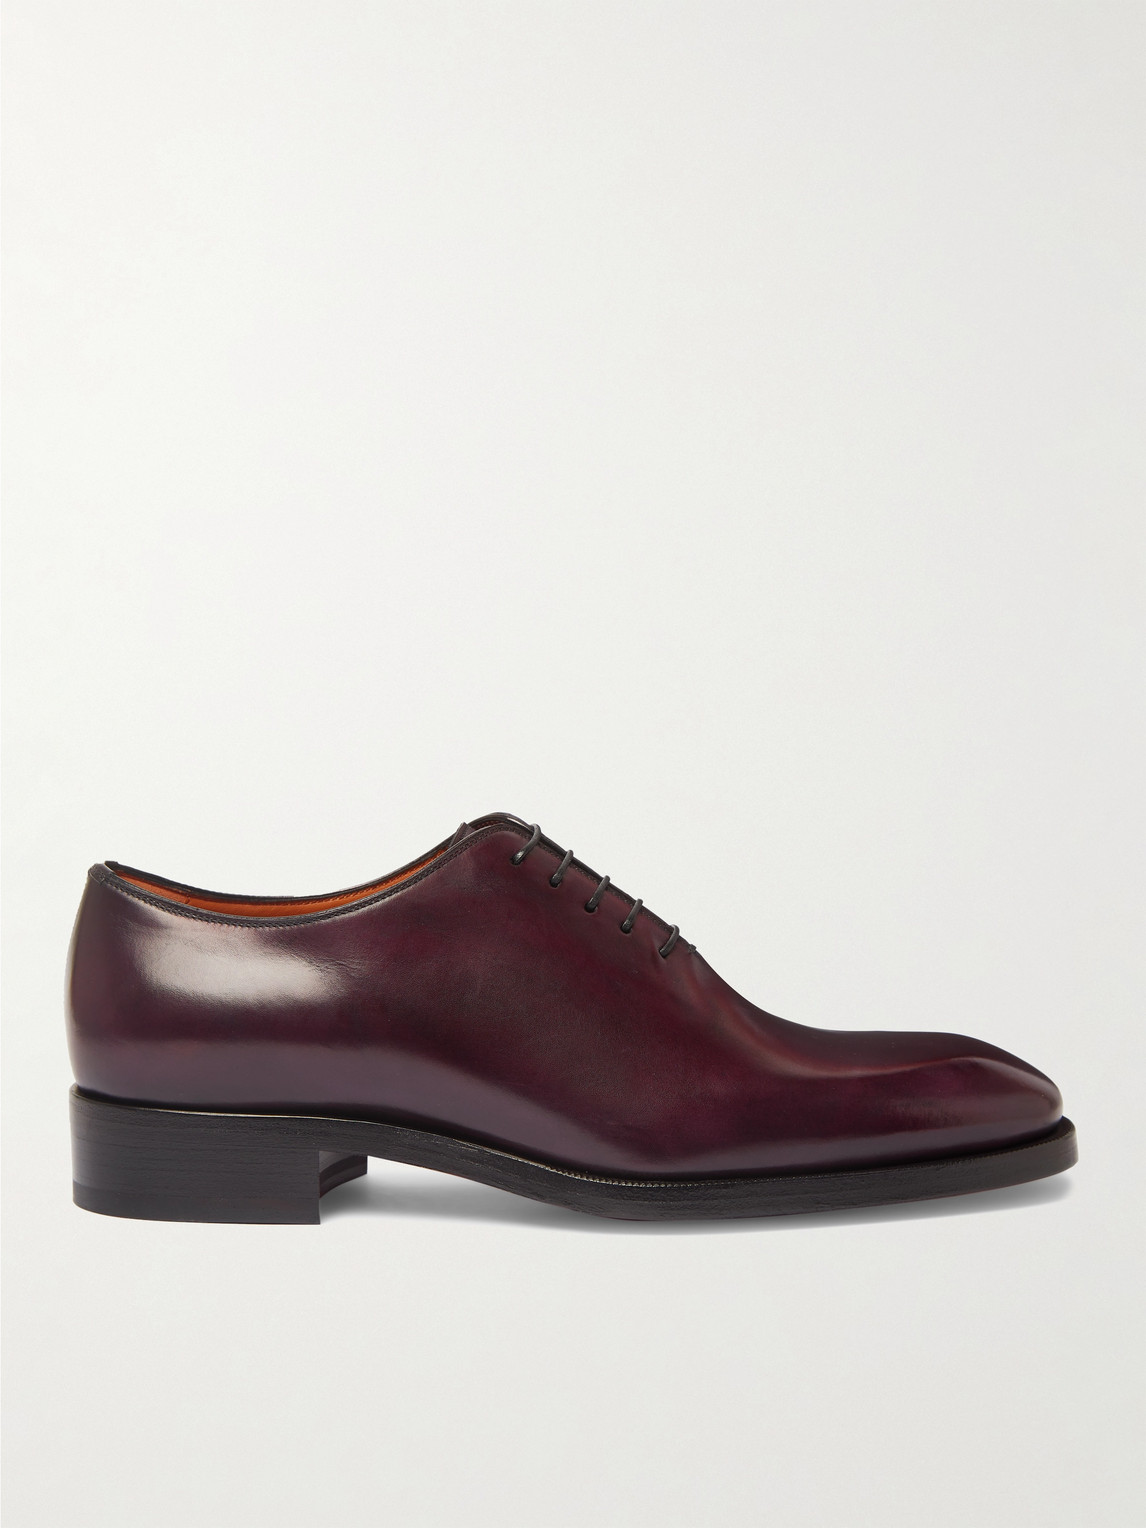 Shop Christian Louboutin Cousin Corteo Leather Oxford Shoes In Burgundy